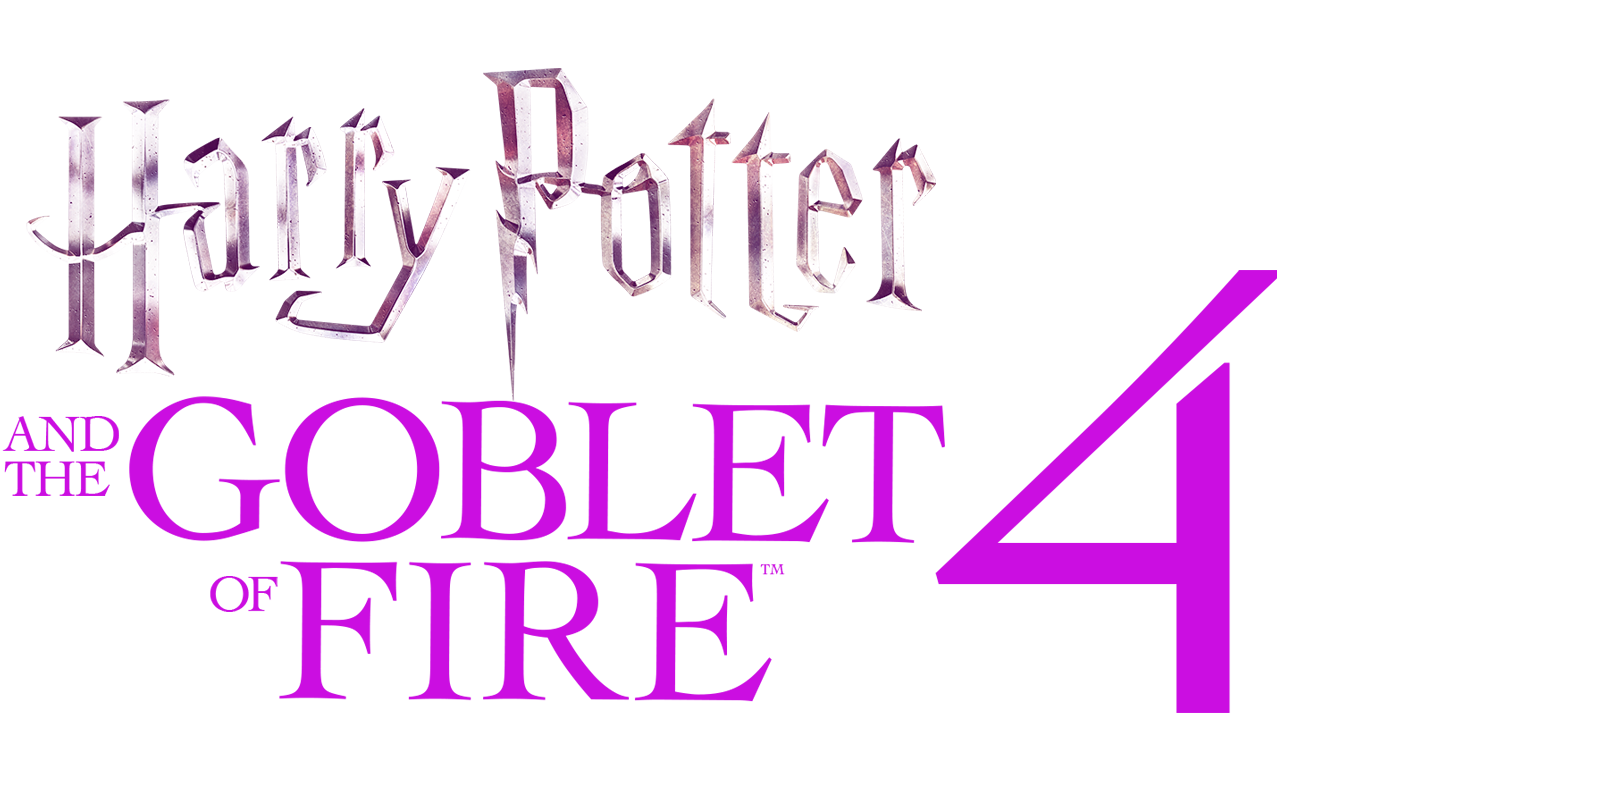 harry potter movies and the goblet of fire full movie